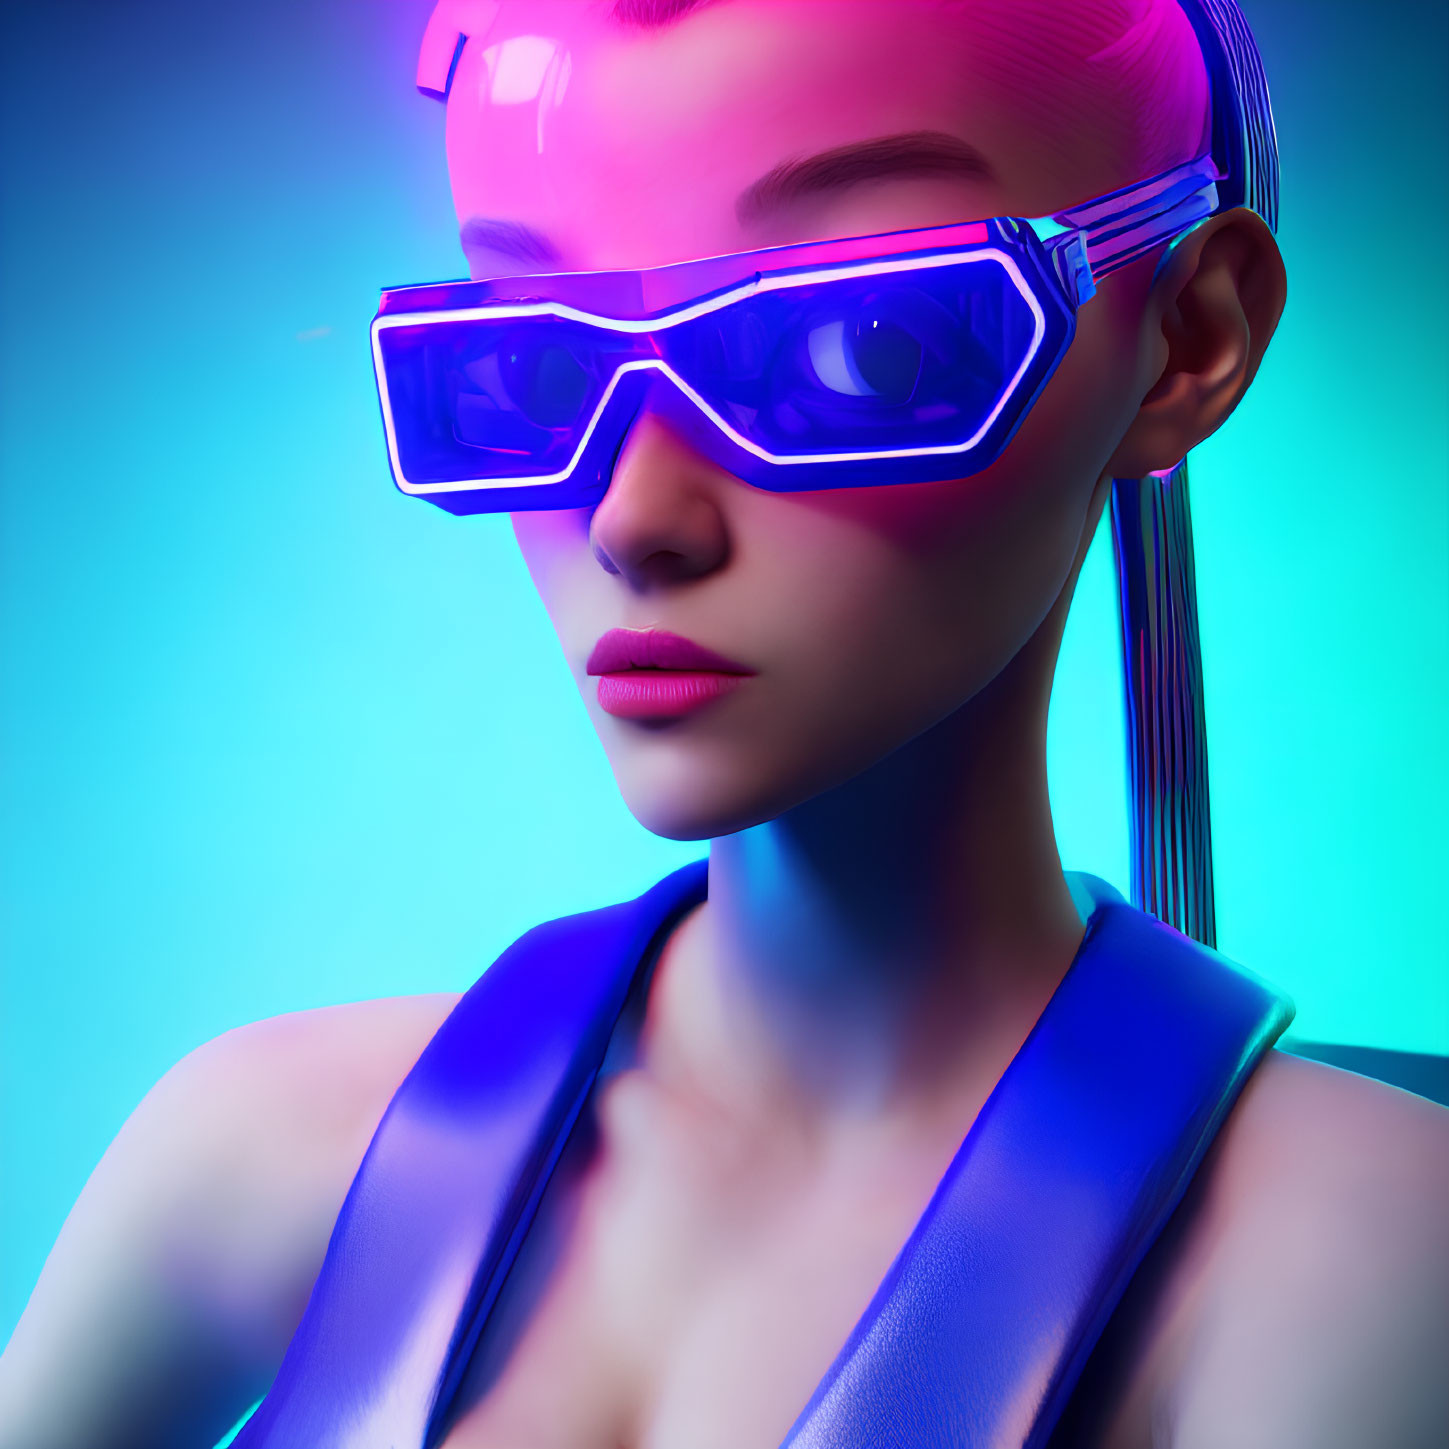 Futuristic female character with pink hair and blue glasses in cyberpunk style